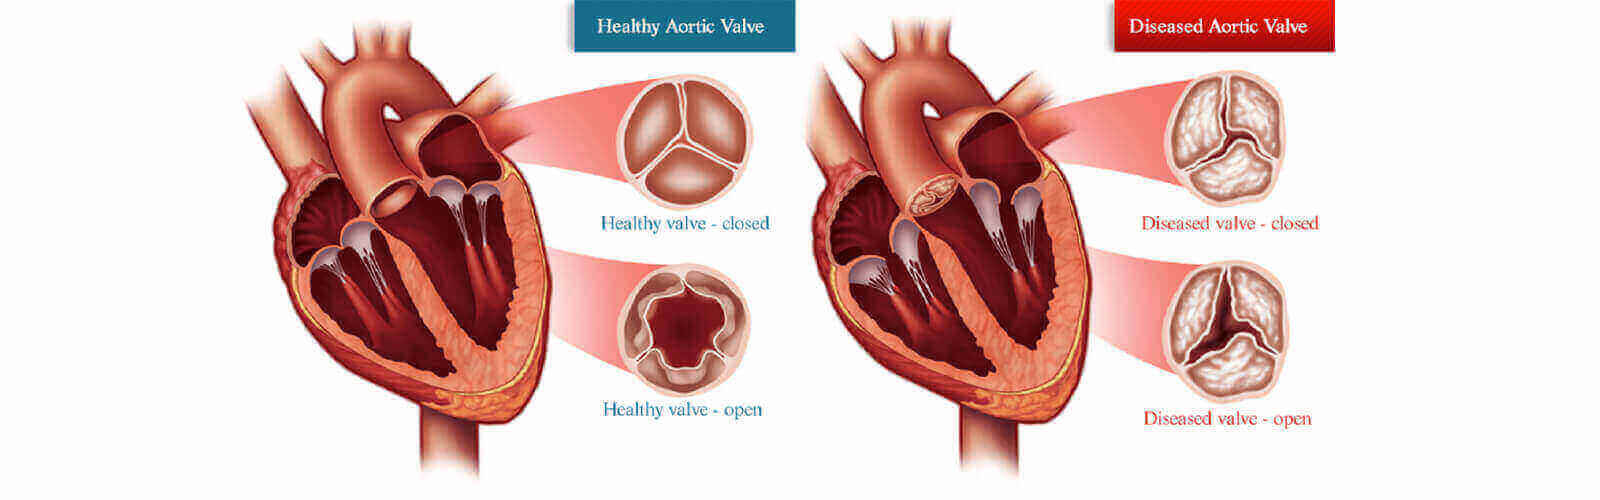 Heart Valve Replacement Surgery in Senegal